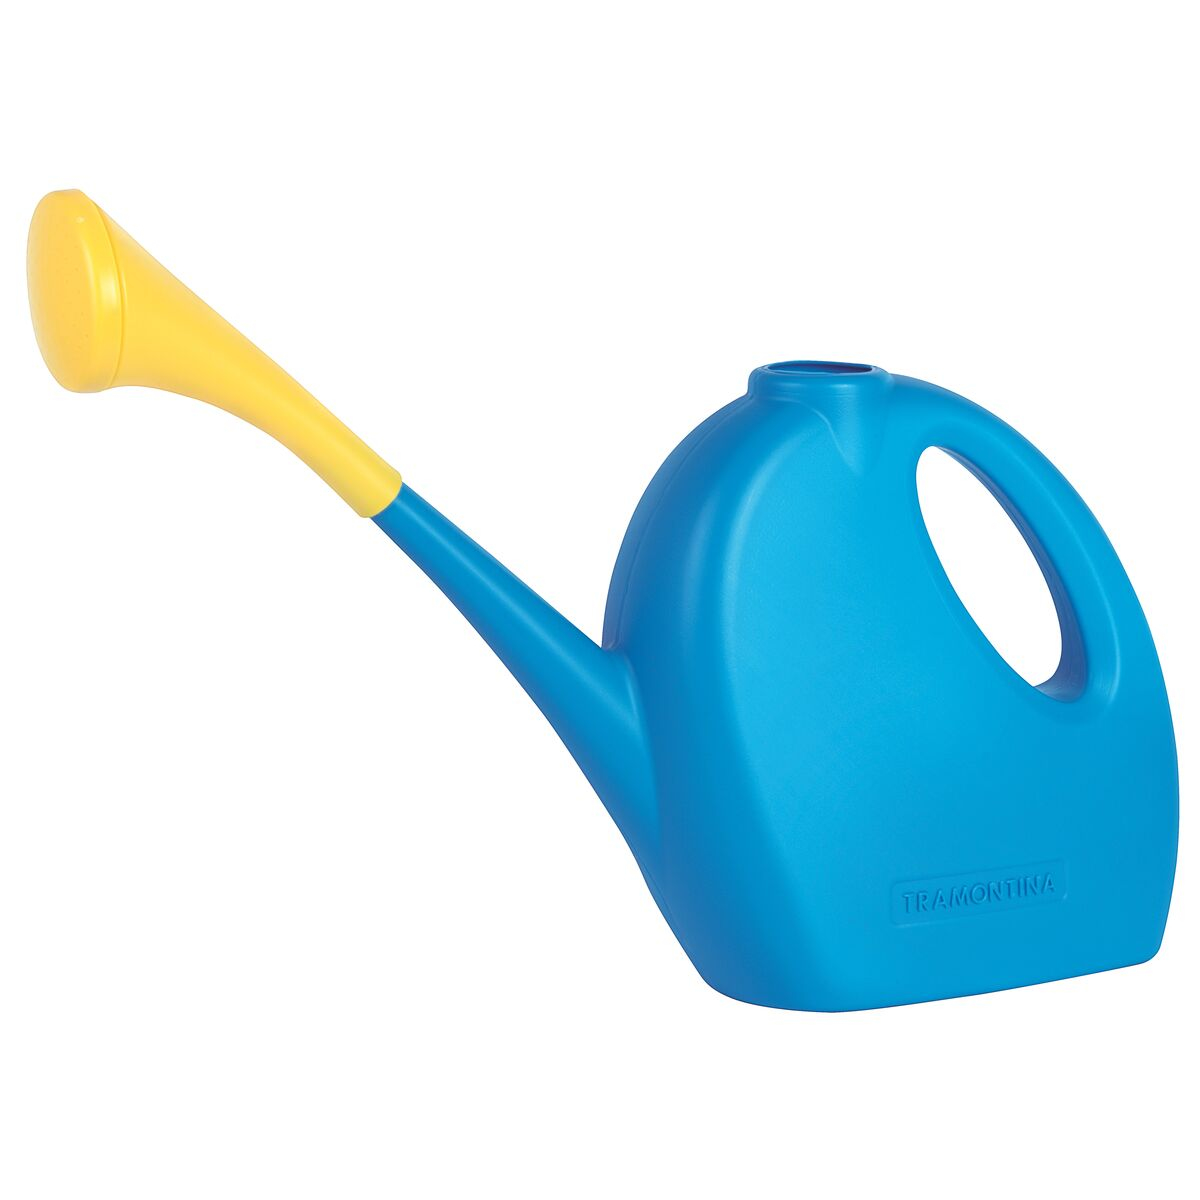 Tramontina's 2 L Blue Plastic Watering Can